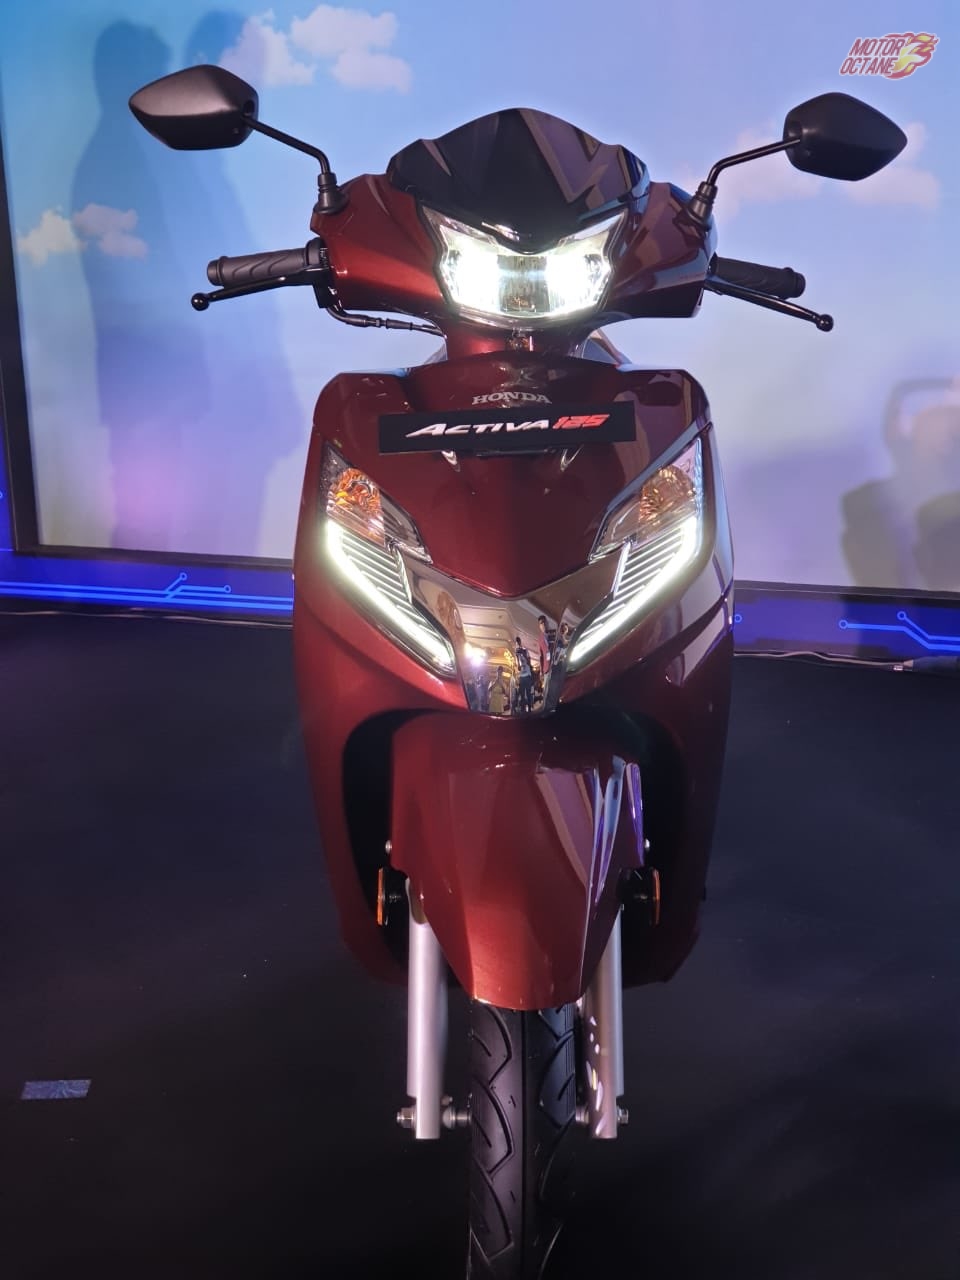 2019 Honda Activa 125 Fi Bs6 Deliveries Commence From Today